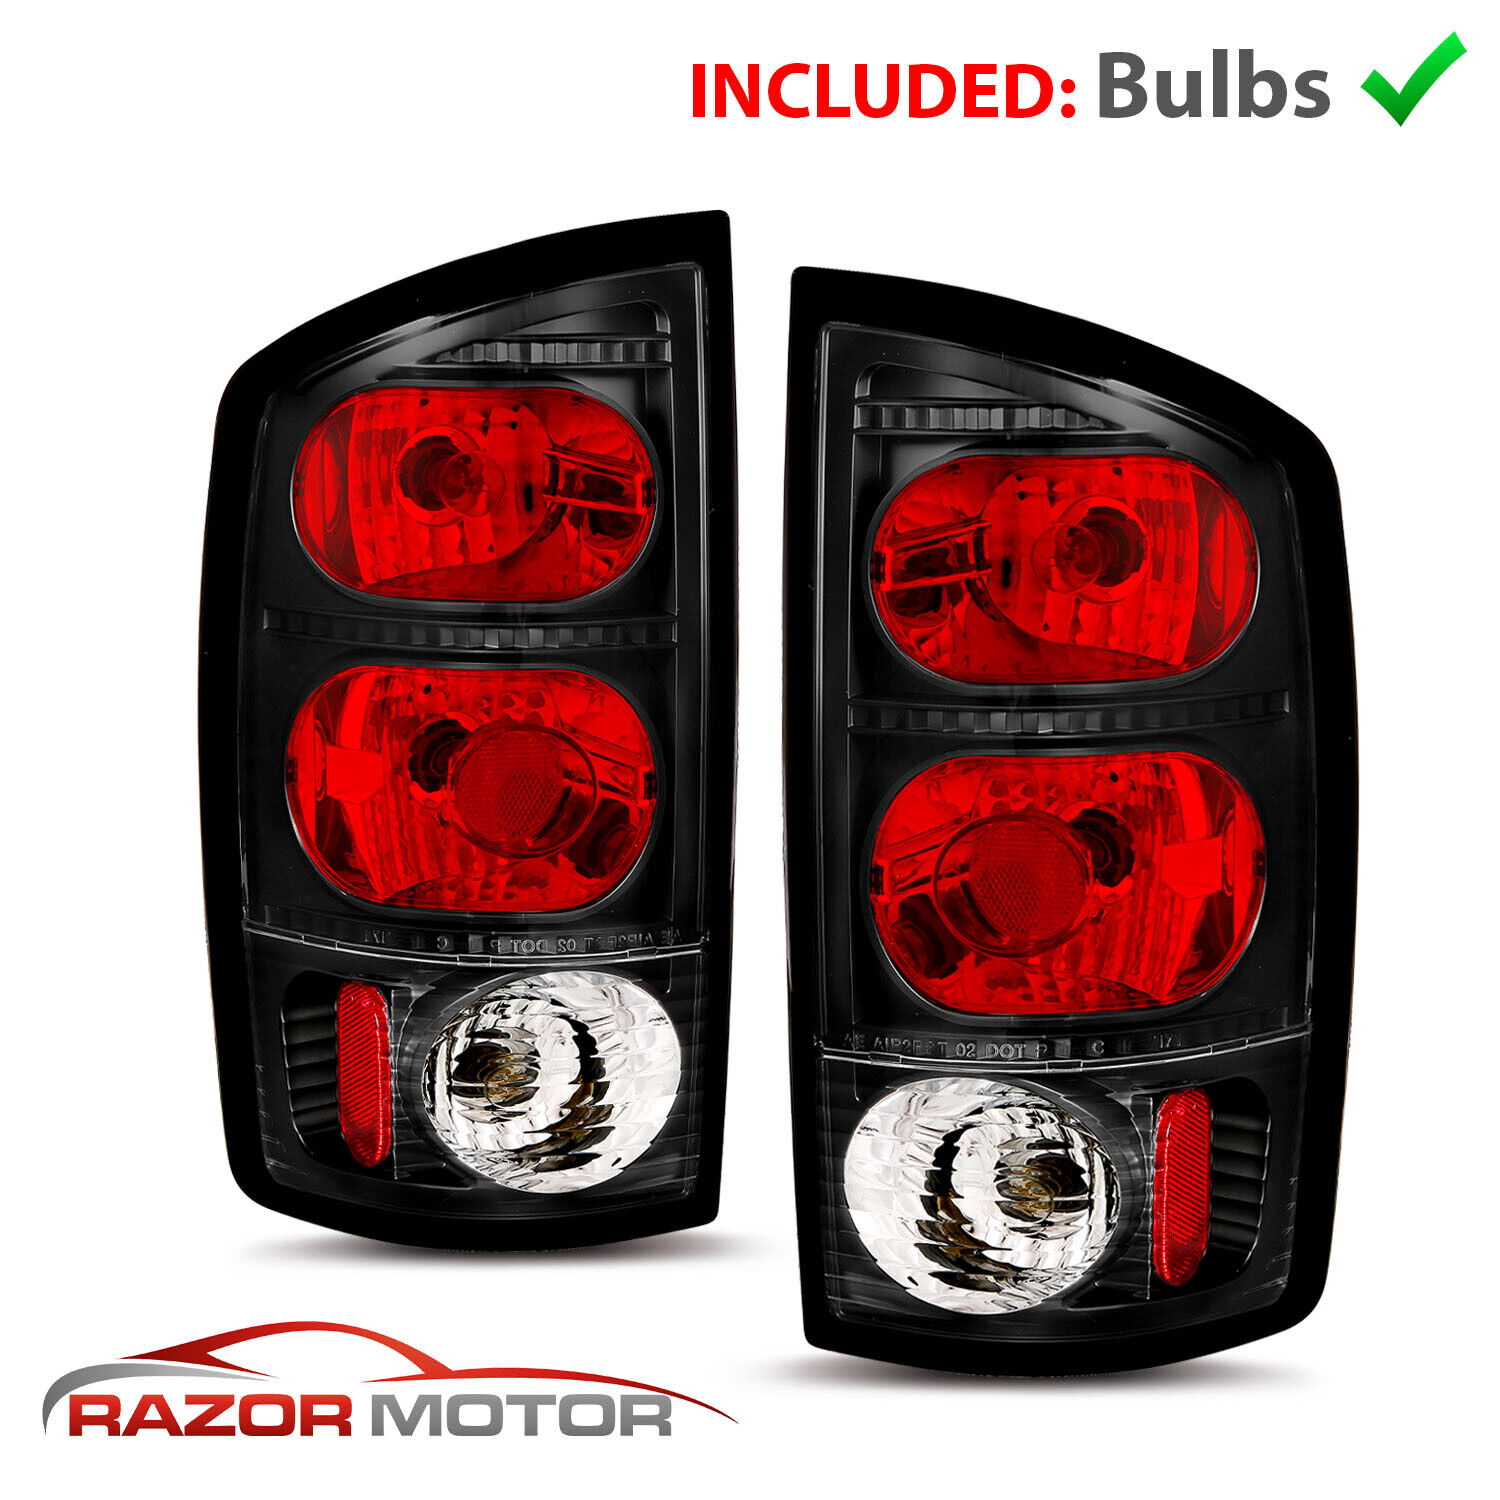 2002-2005 Replacement Black Euro Tail Light Pair For Dodge Ram 1500/2500/3500